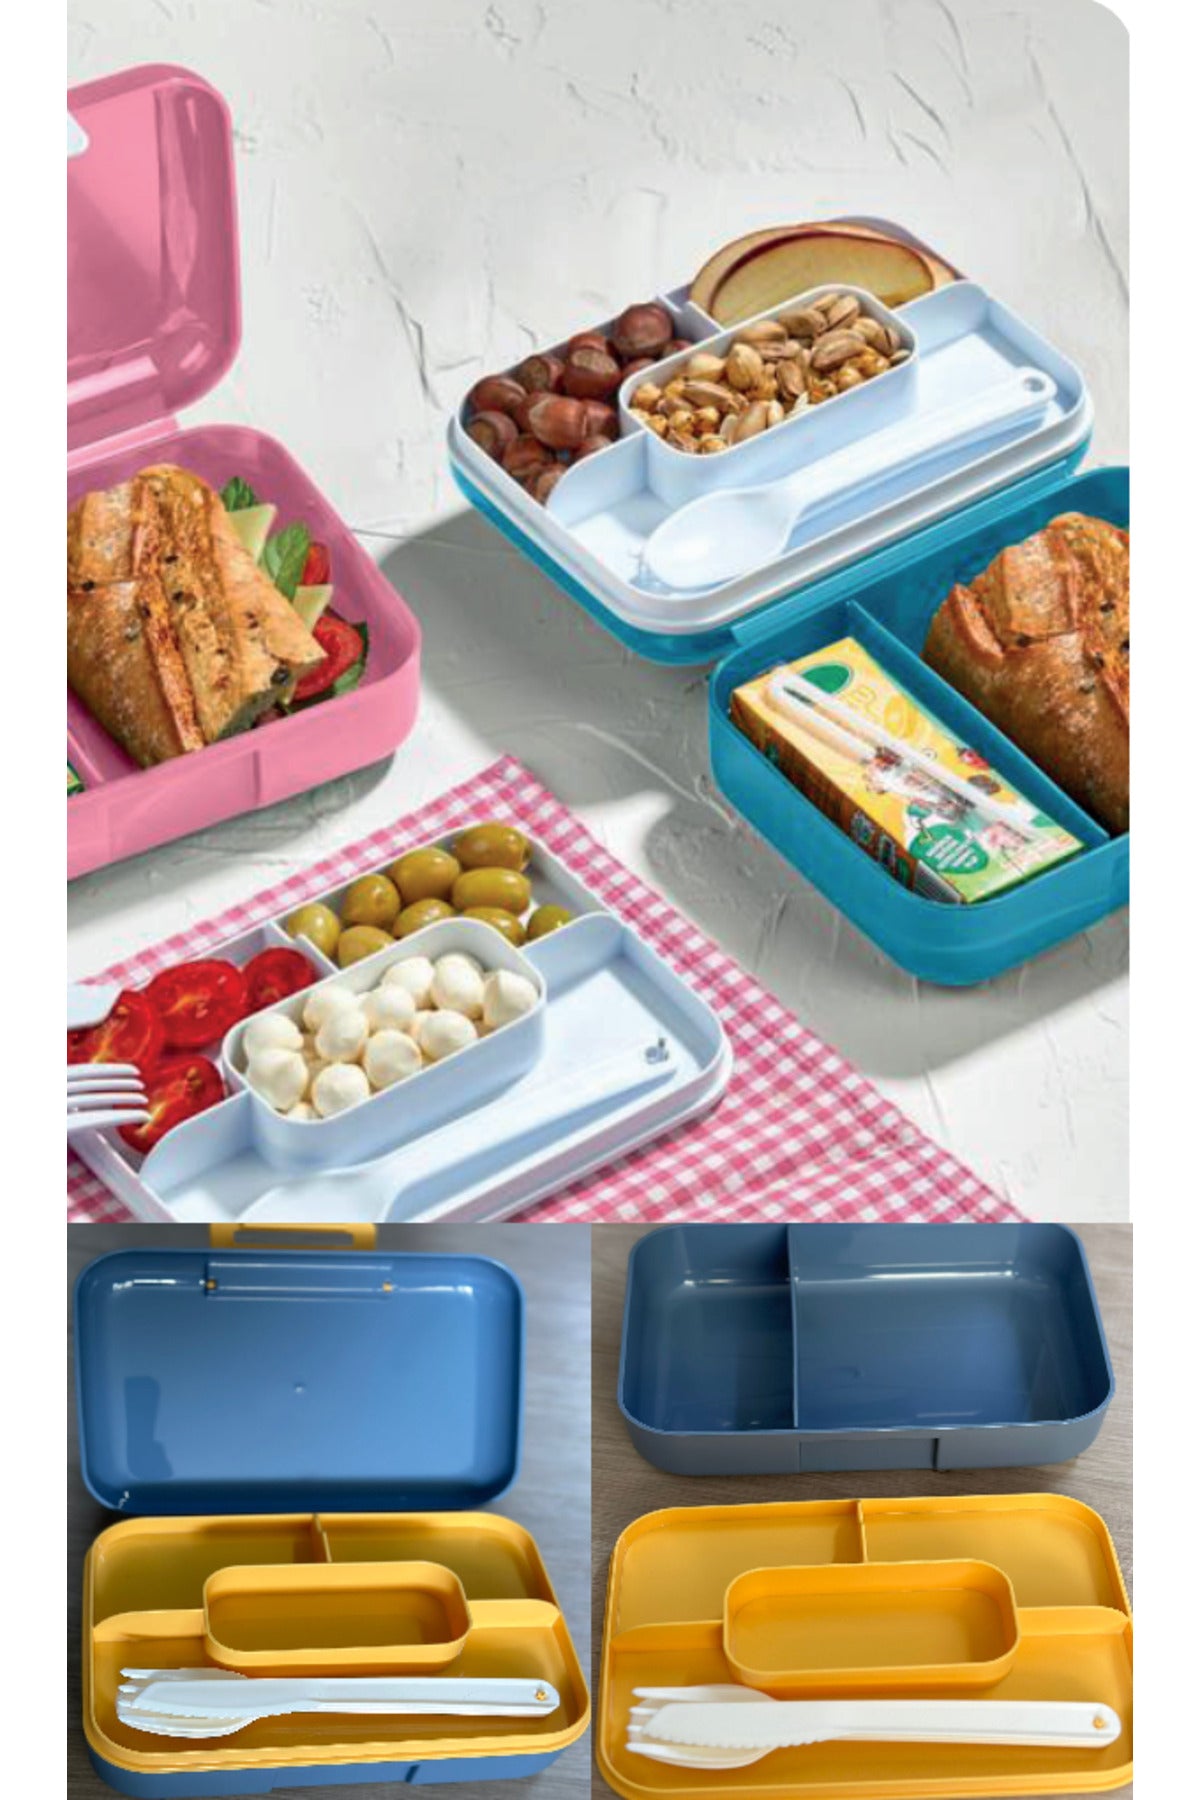 Blue 2-Layer Compartment Lockable Lunch Box and Spoon Set Snack Bread Storage Container